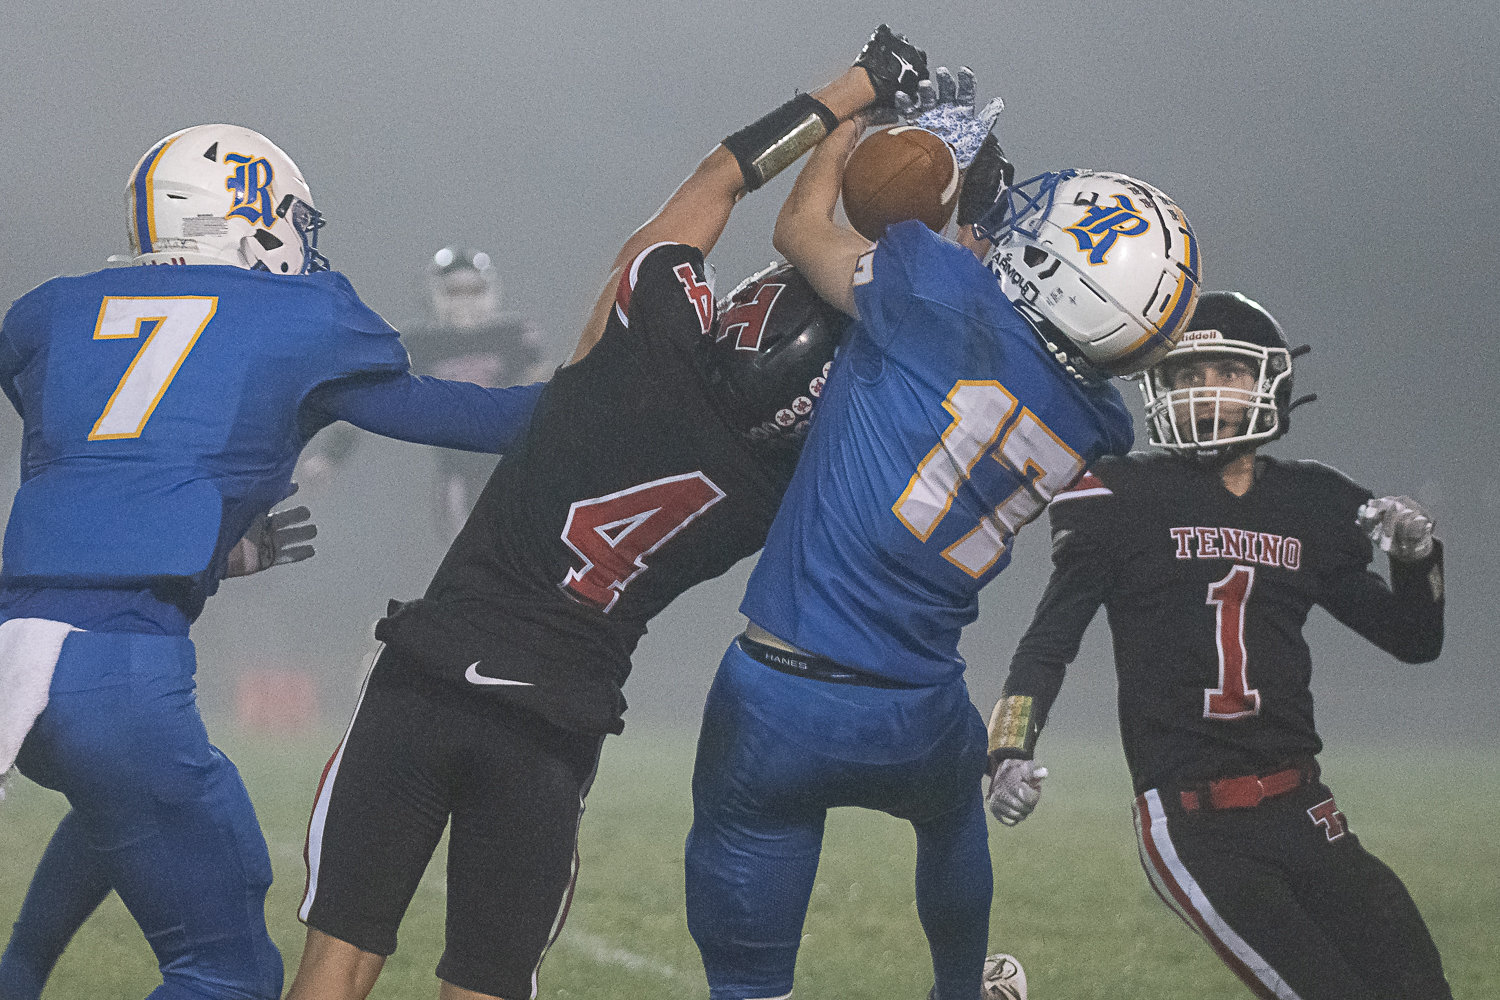 Rochester receiver Ethan Rodriguez hauls in a contested catch against Tenino Oct. 28 in the Scatter Creek Showdown.